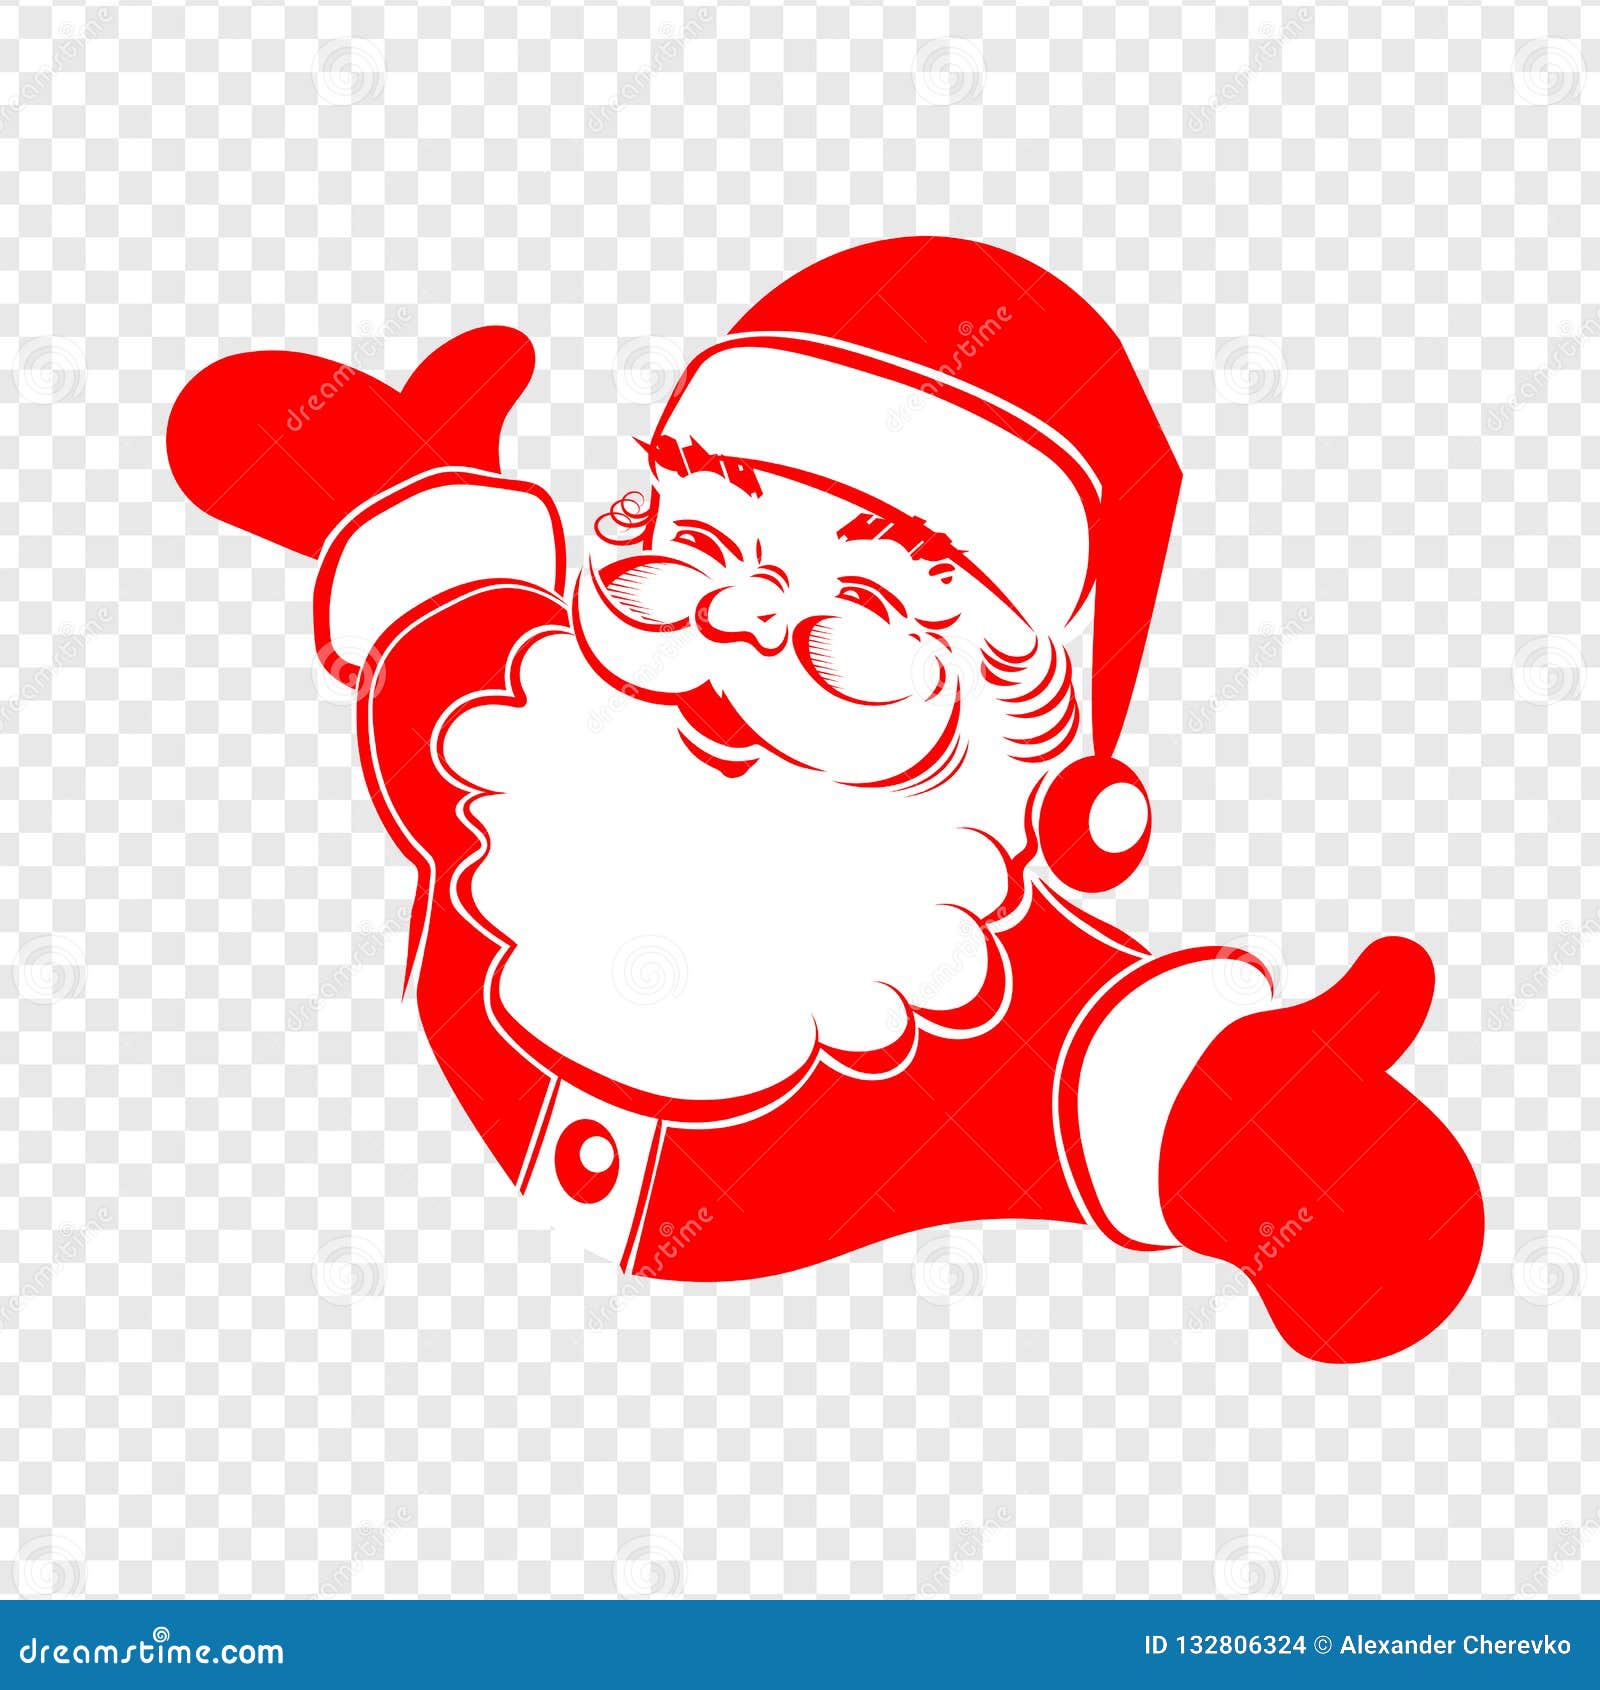 A Drawing of Santa Claus Hands are Bred in Different Directions of Red and  White Color. Stock Vector - Illustration of frost, congratulation: 132806324